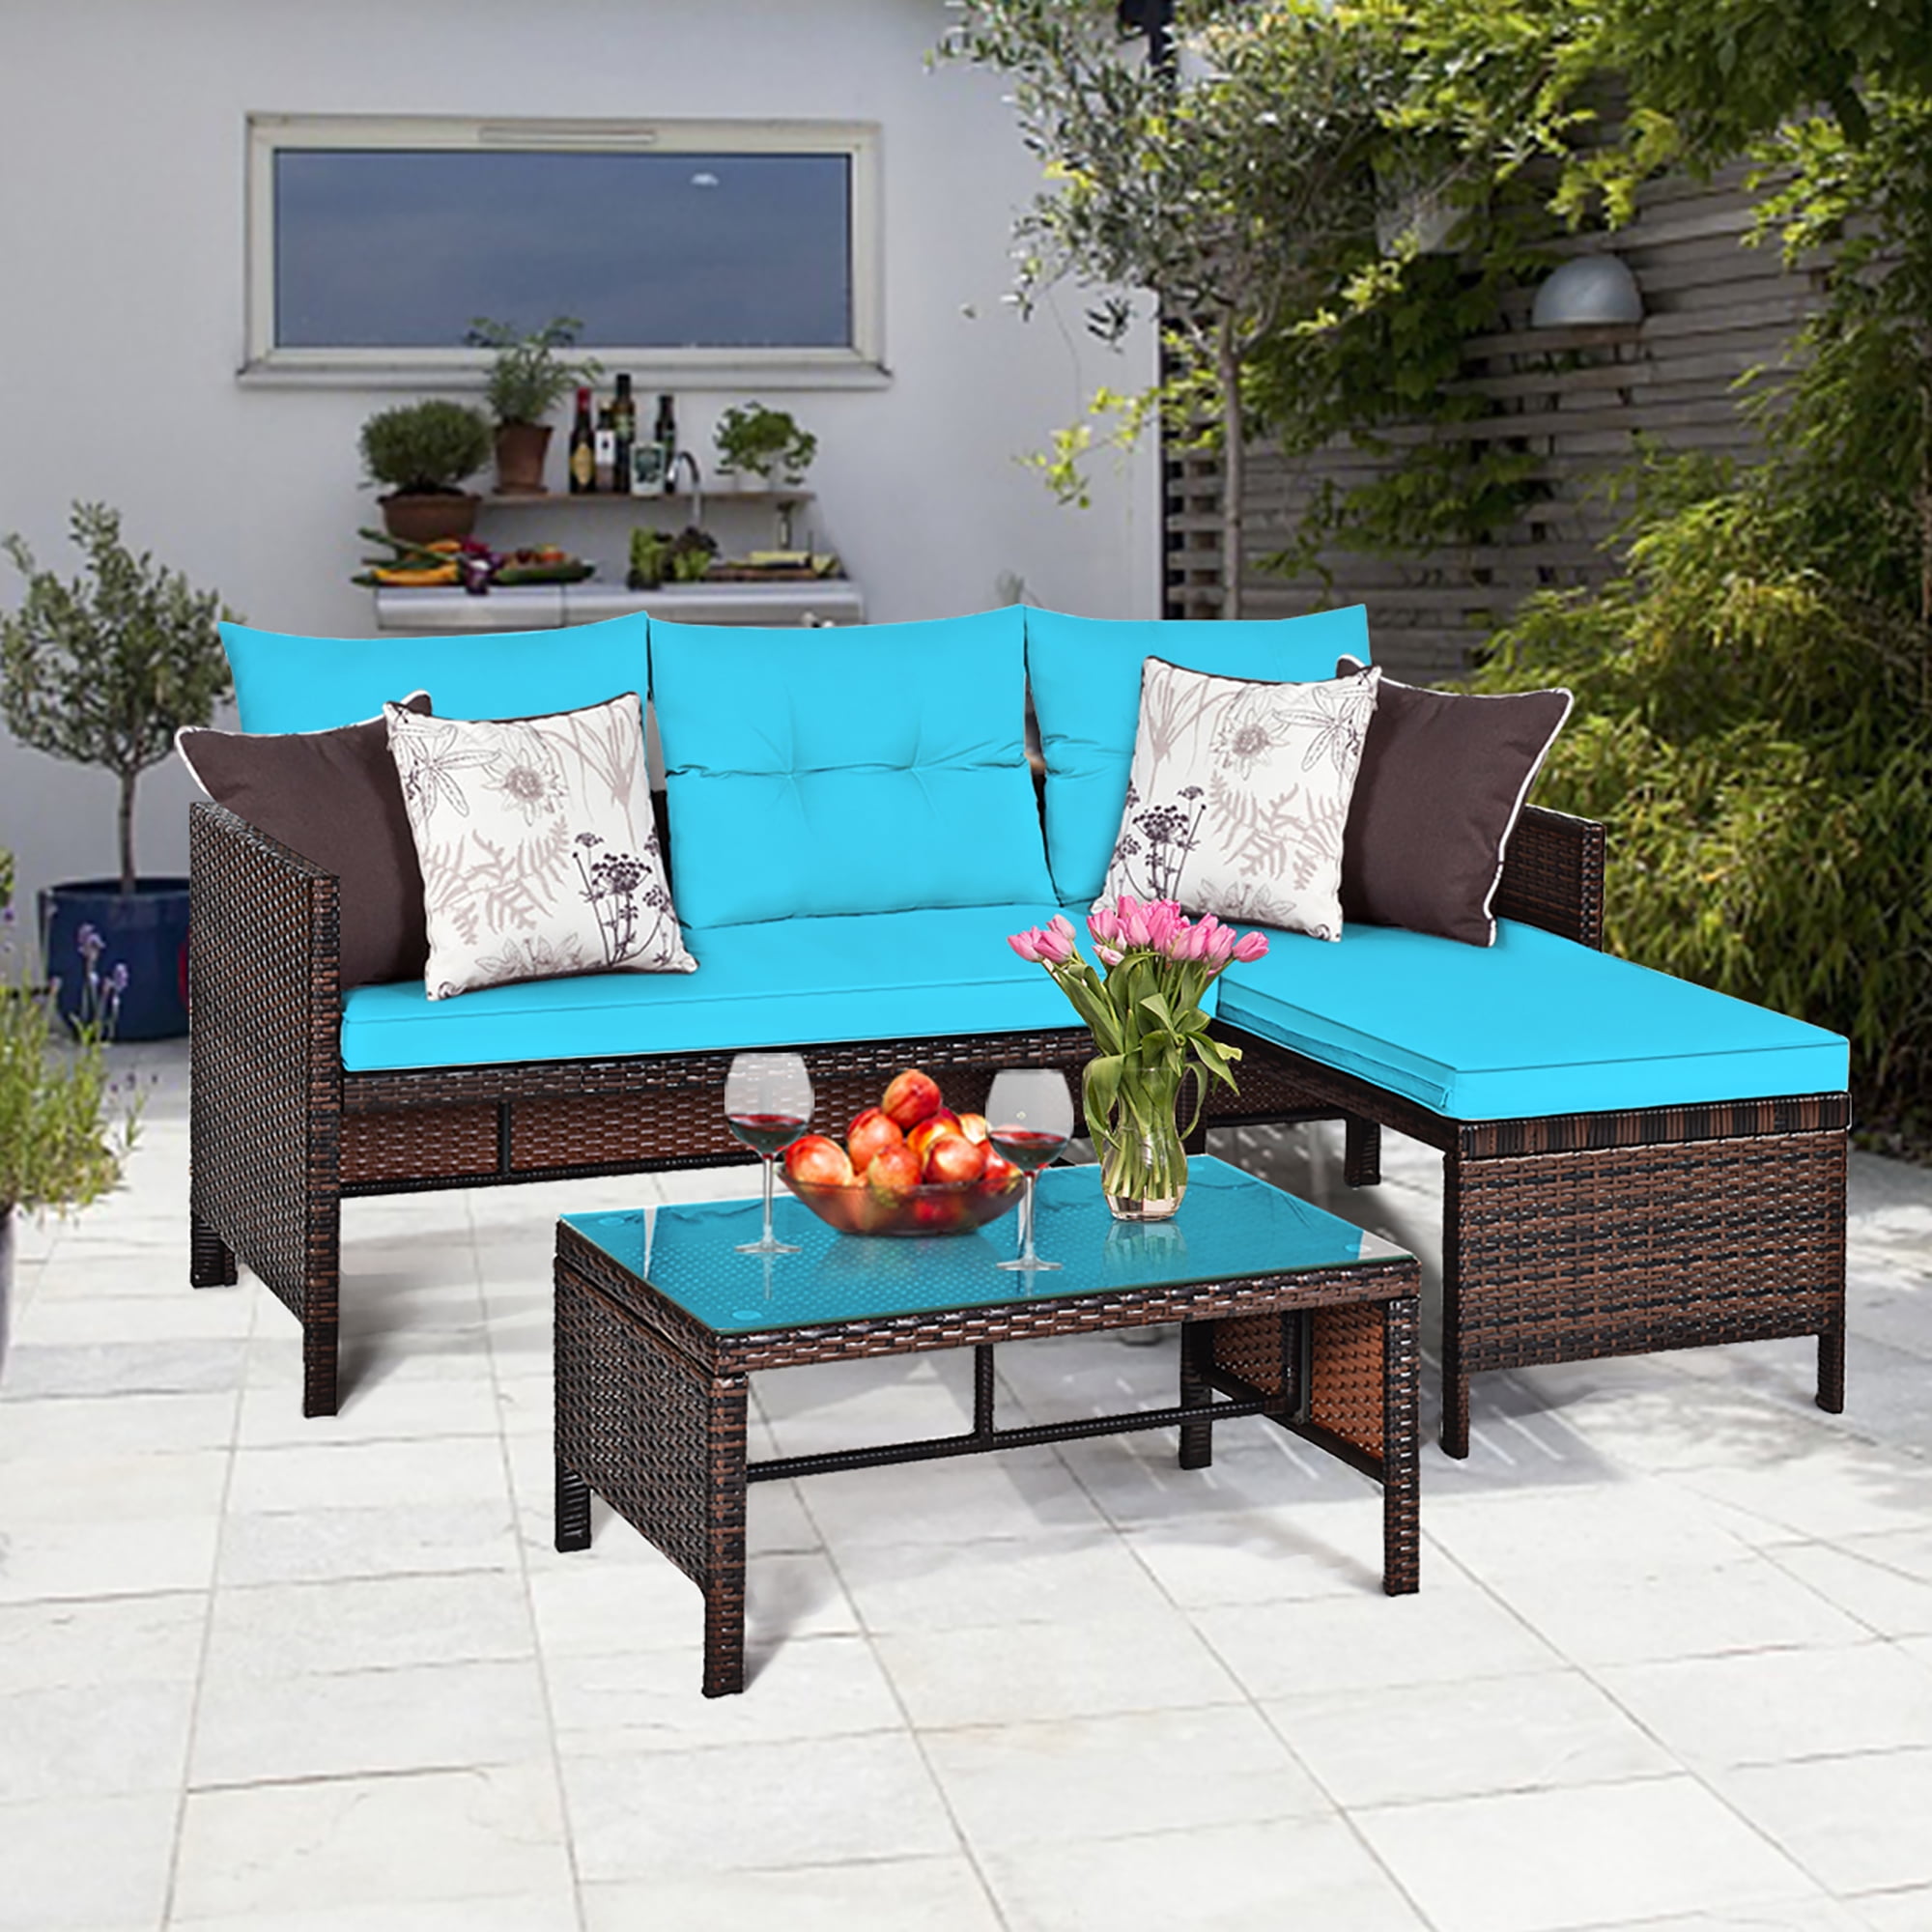 3 Piece Patio Rattan Garden Conversation Couch Furniture with Turquoise Cushion Outdoor PE Wicker Sofa Set 